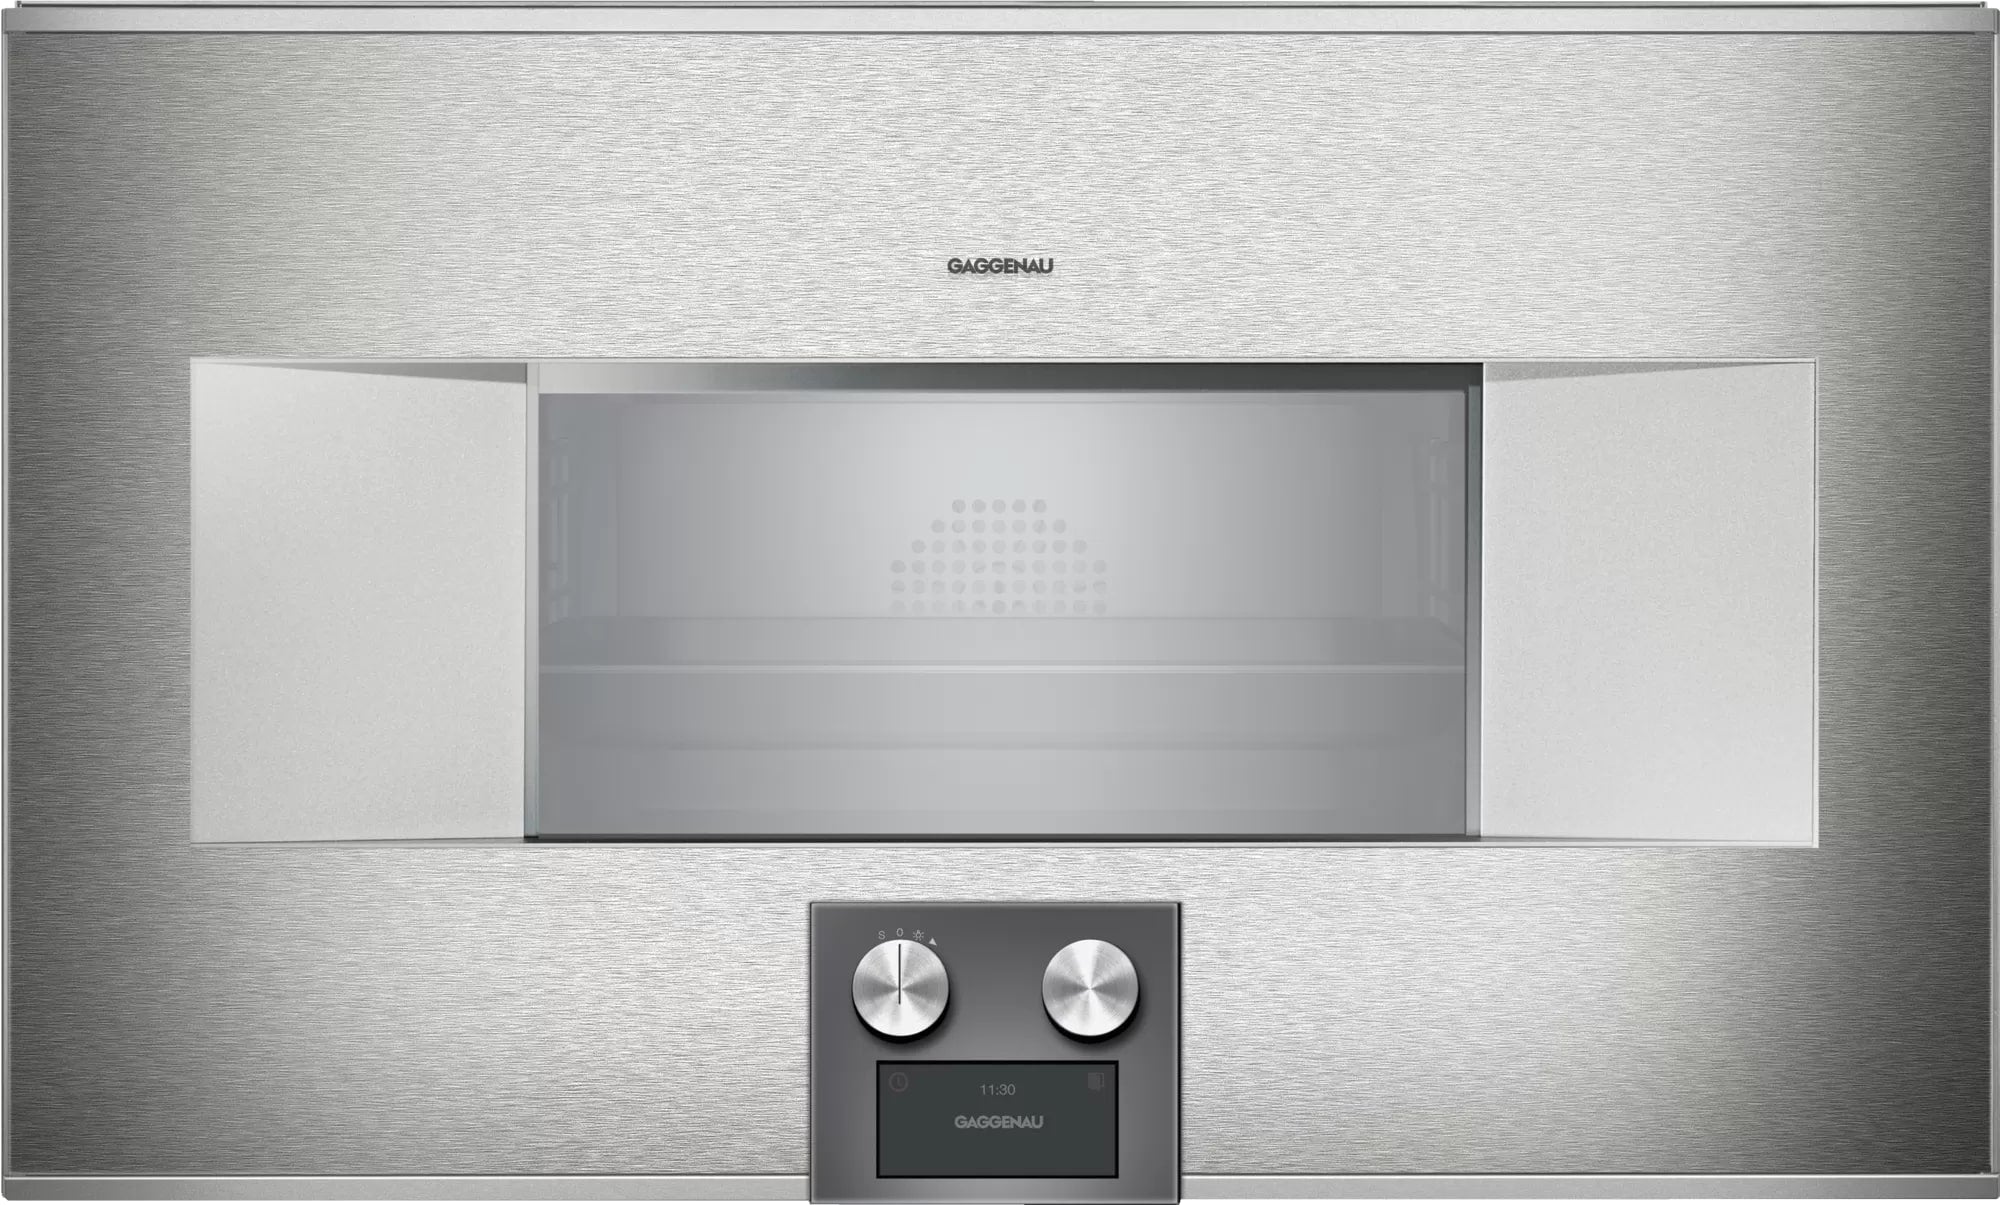 Gaggenau - 2.1 cu. ft Steam Wall Oven in Stainless - BS484612